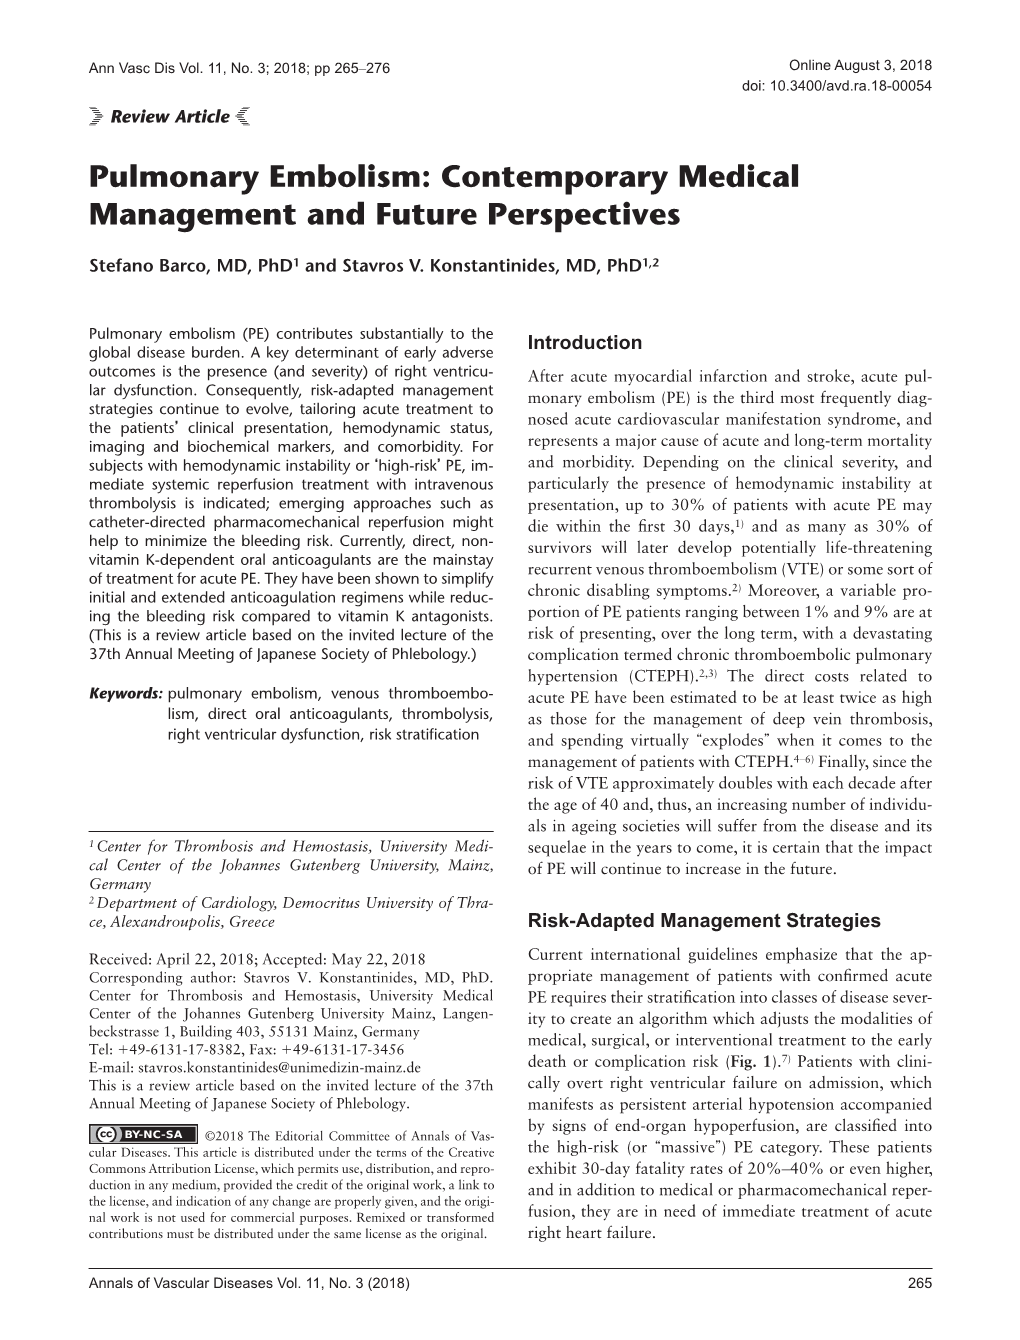 Pulmonary Embolism: Contemporary Medical Management and Future Perspectives